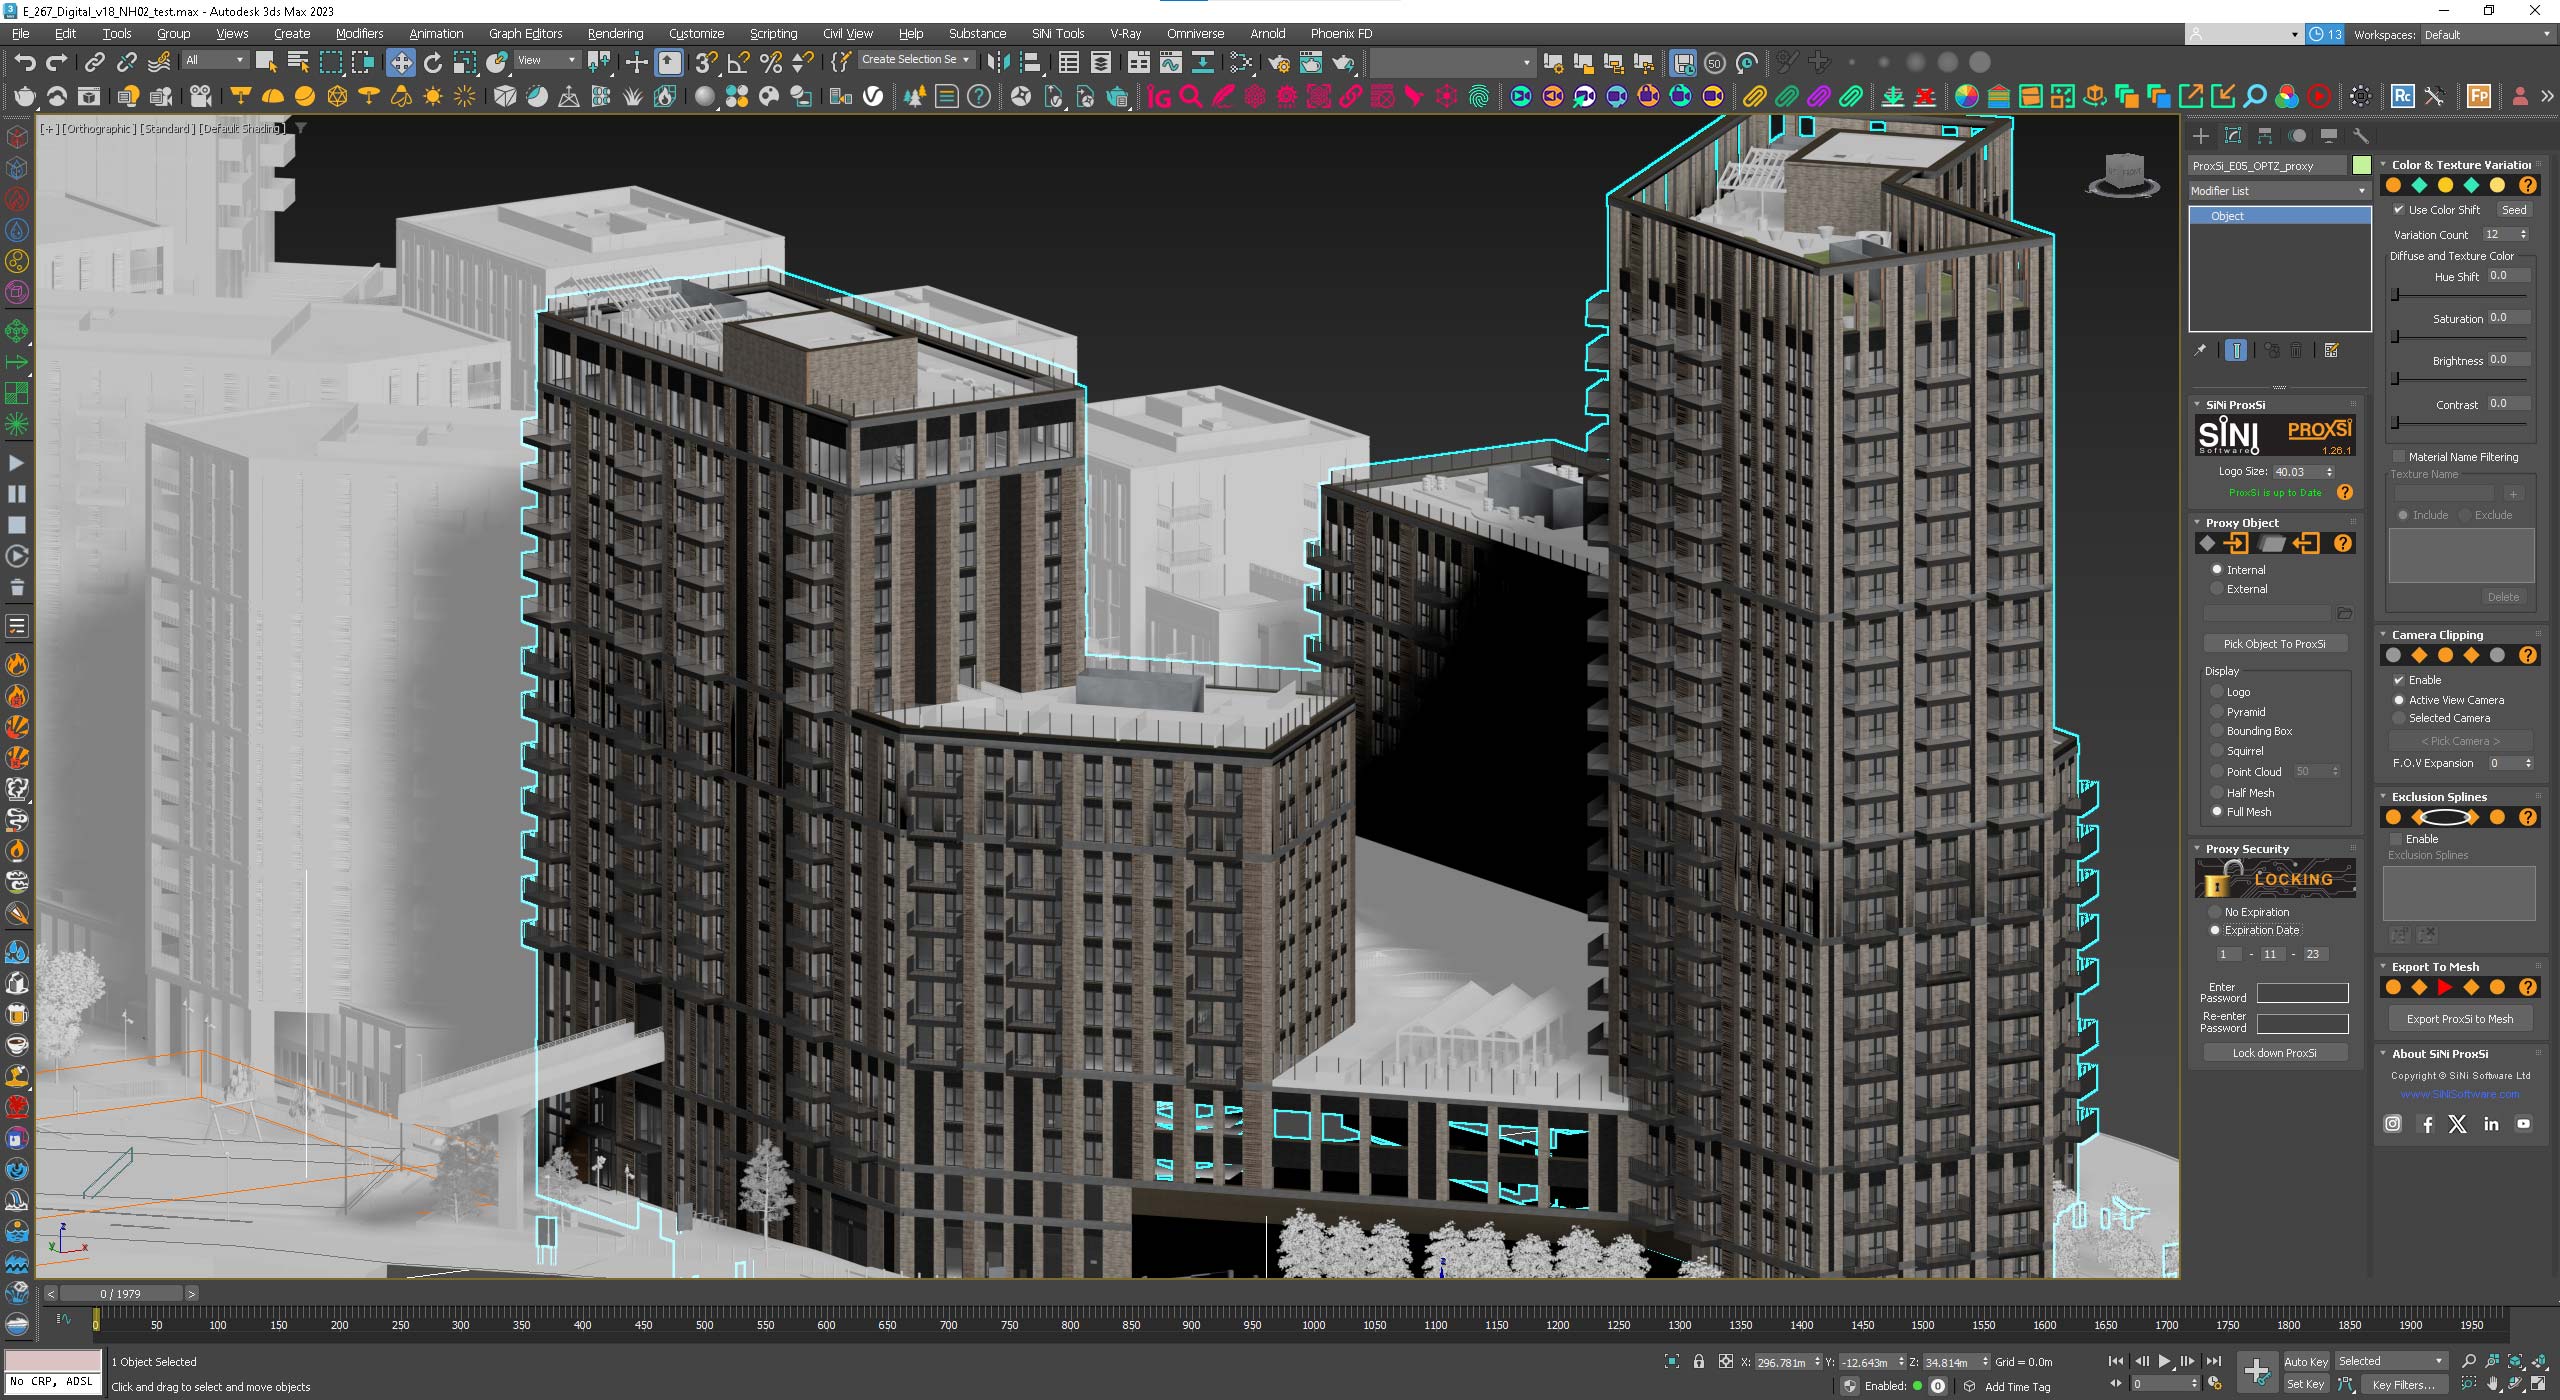 Rendered client image of a city used for products page for ProxSi a 3ds max plugin